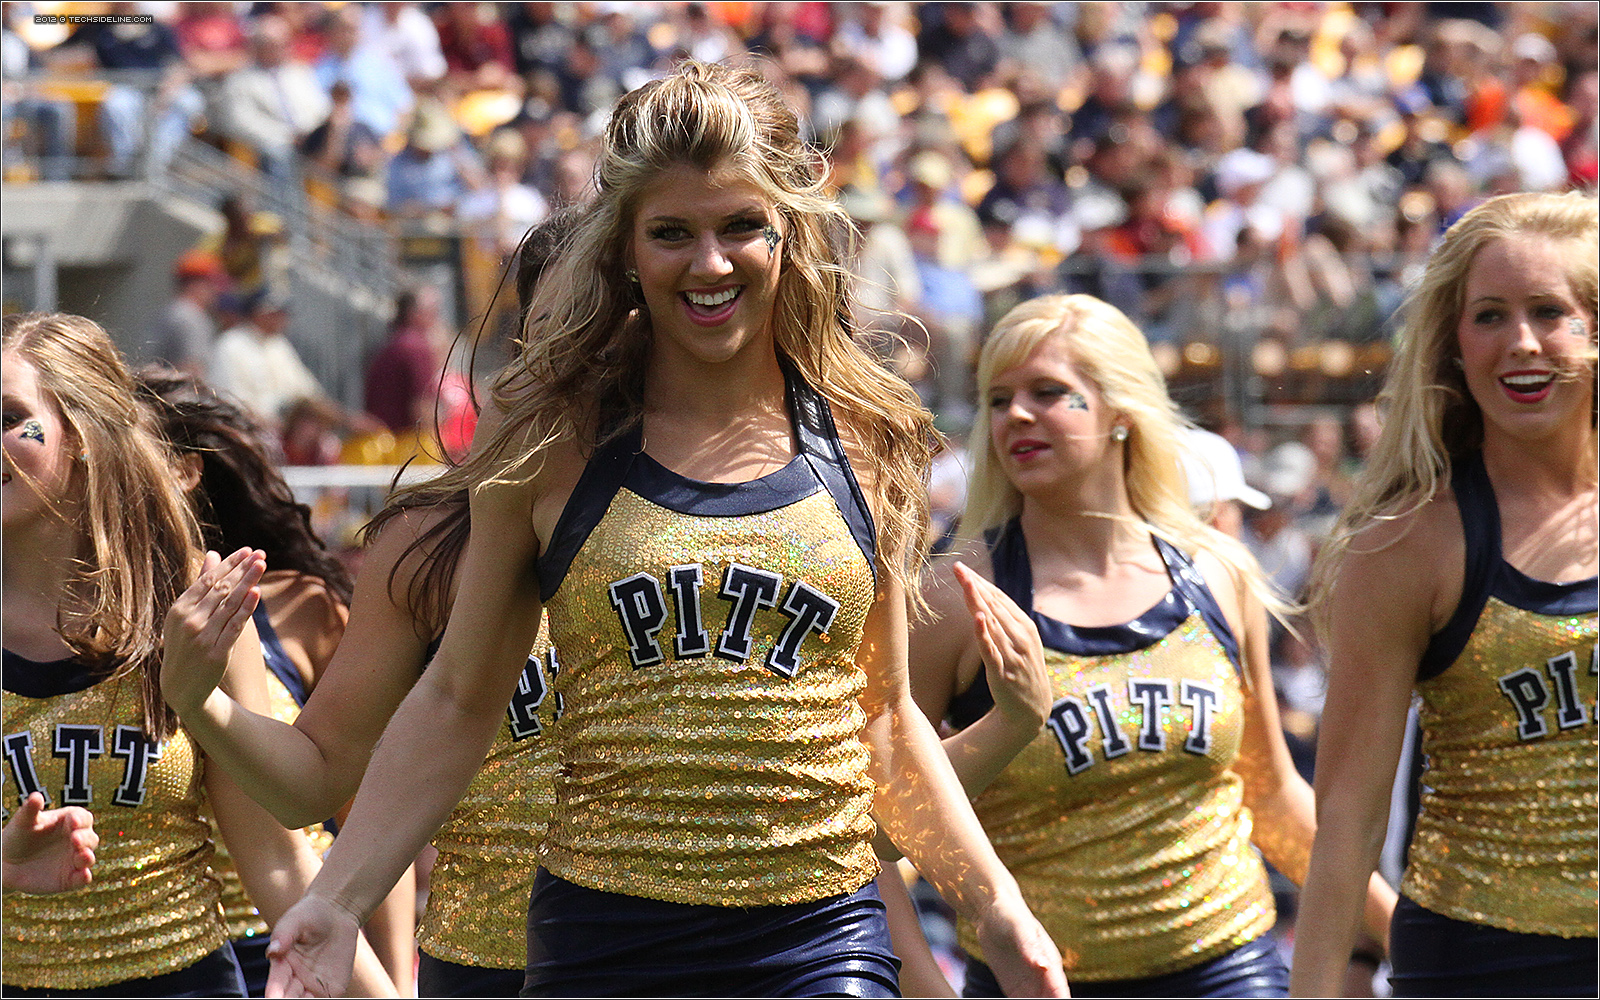 She's beautiful, but last year's Pitt game was UGLY